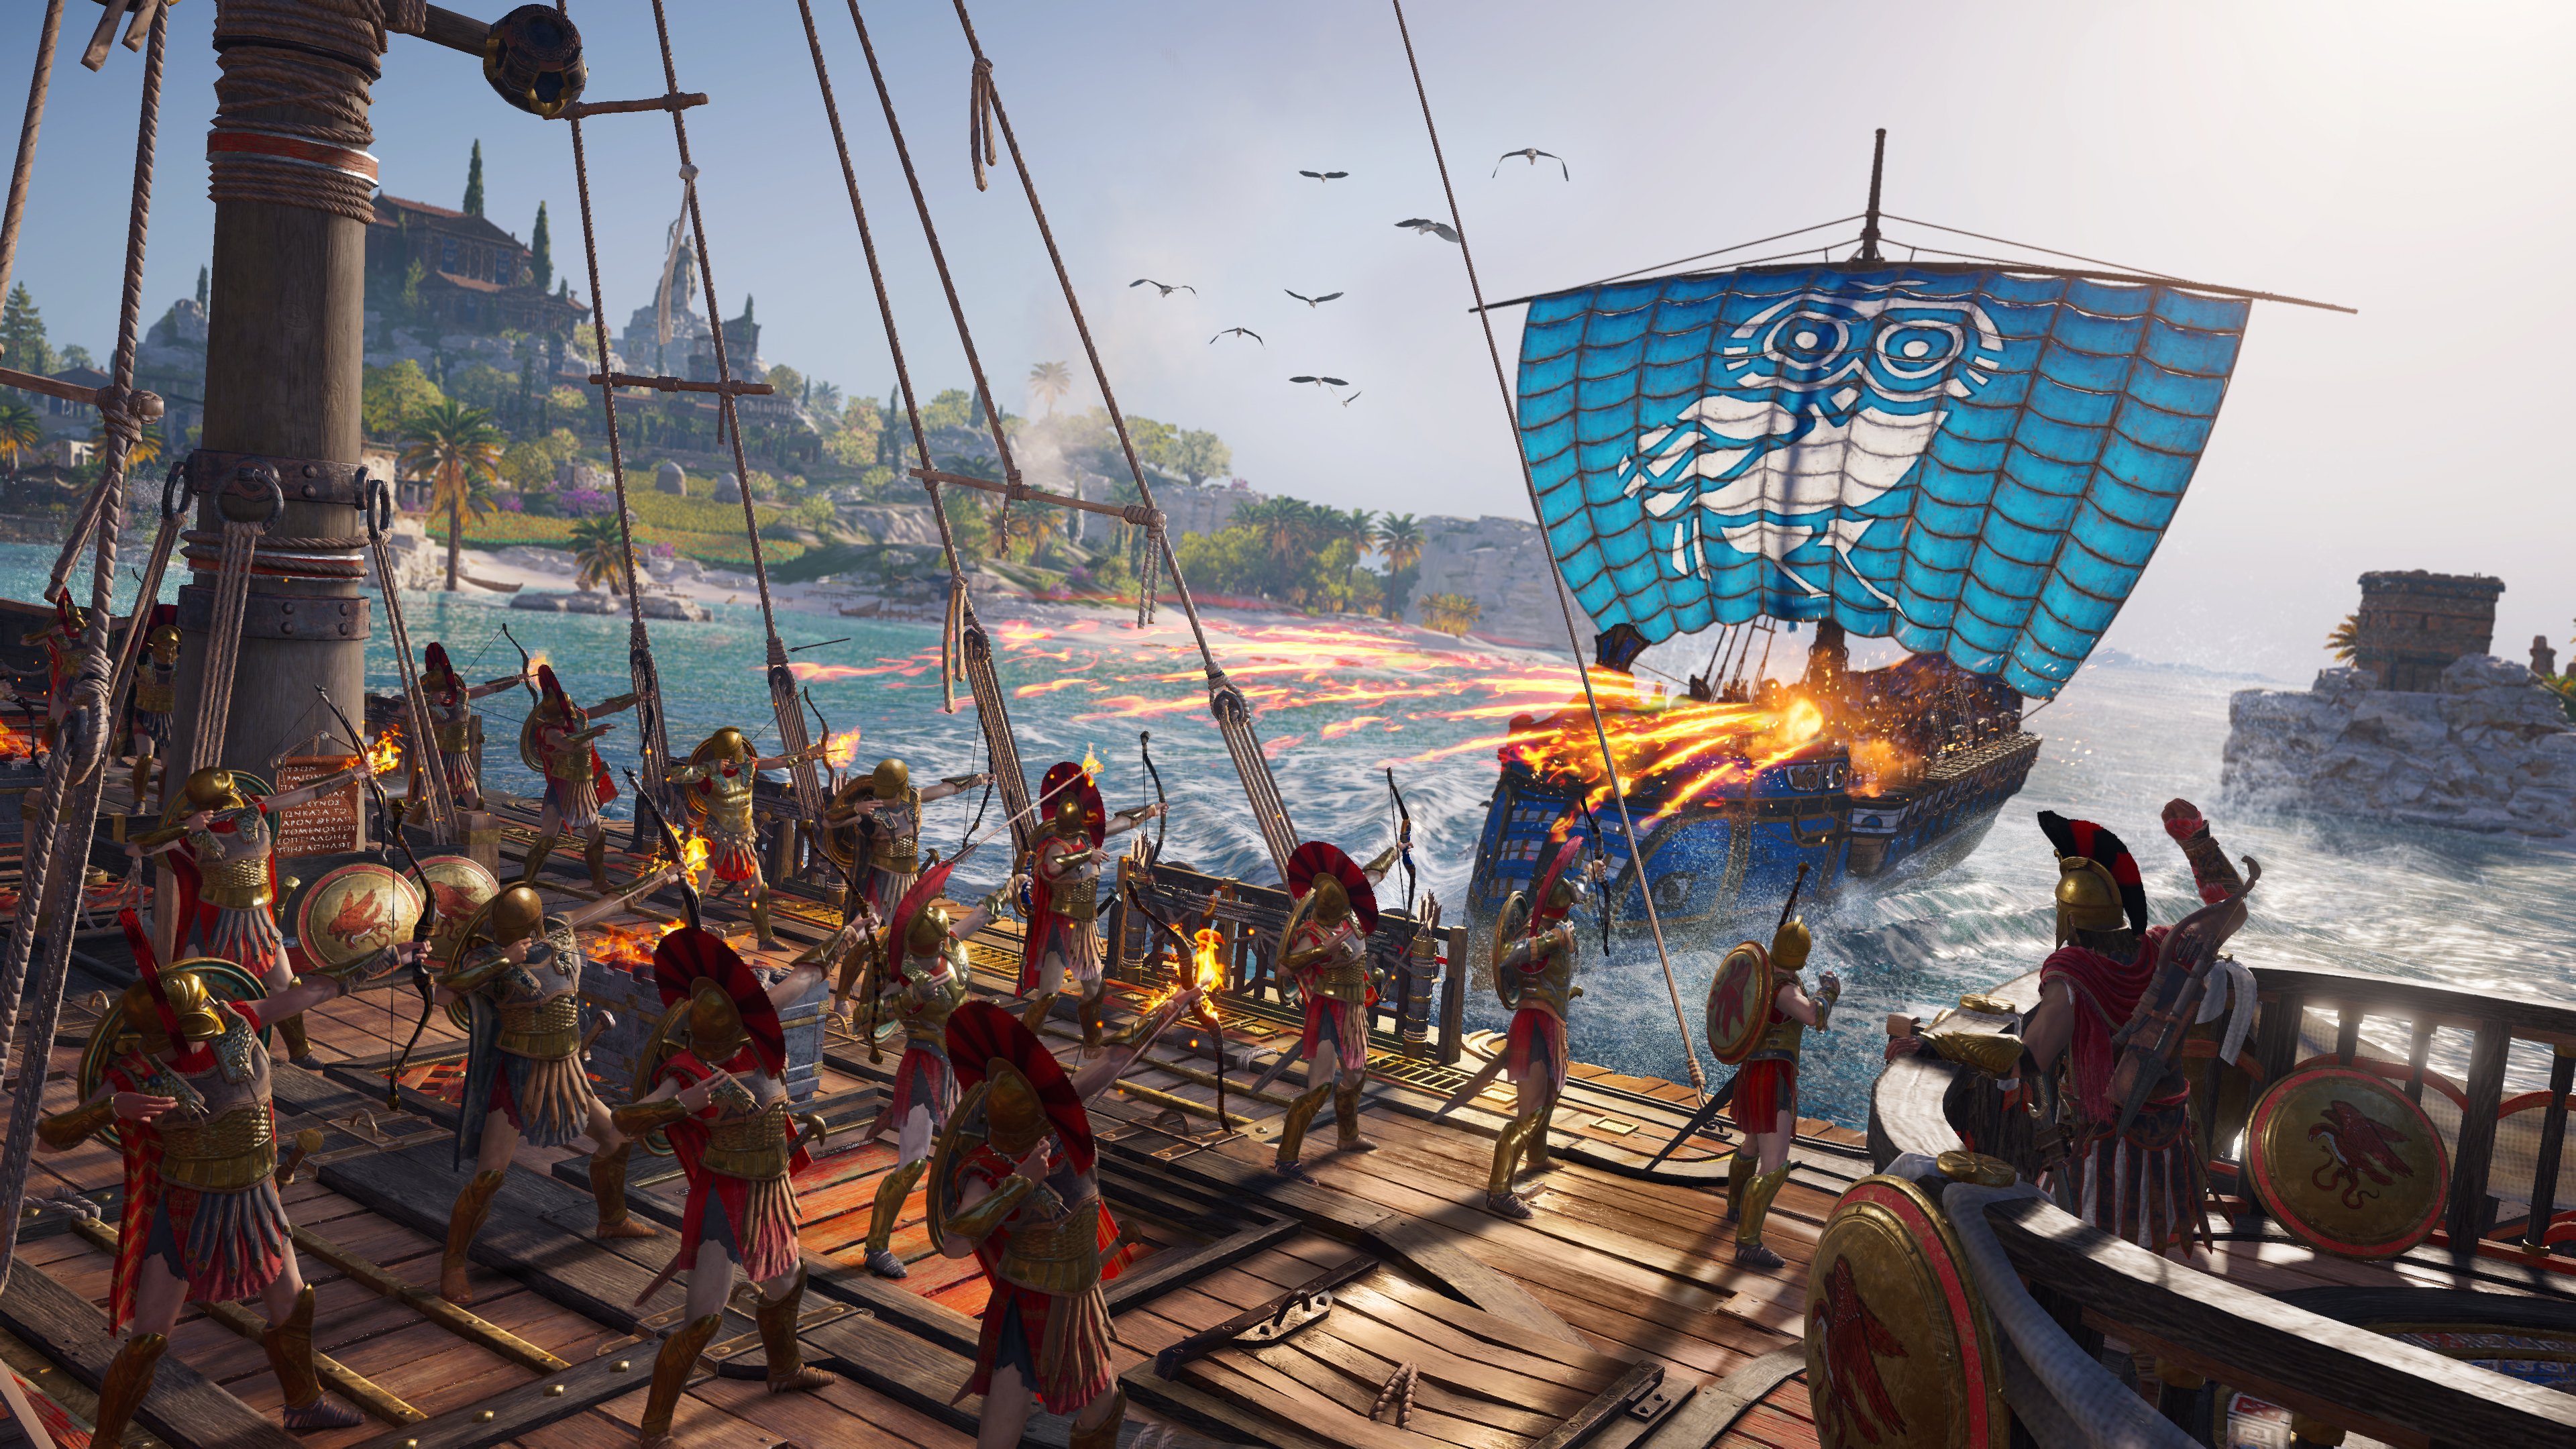 Assassins Creed Assassins Creed Odyssey Assassins Creed Odyssey Sparta Alexios Sea Warship Athens So 3840x2160